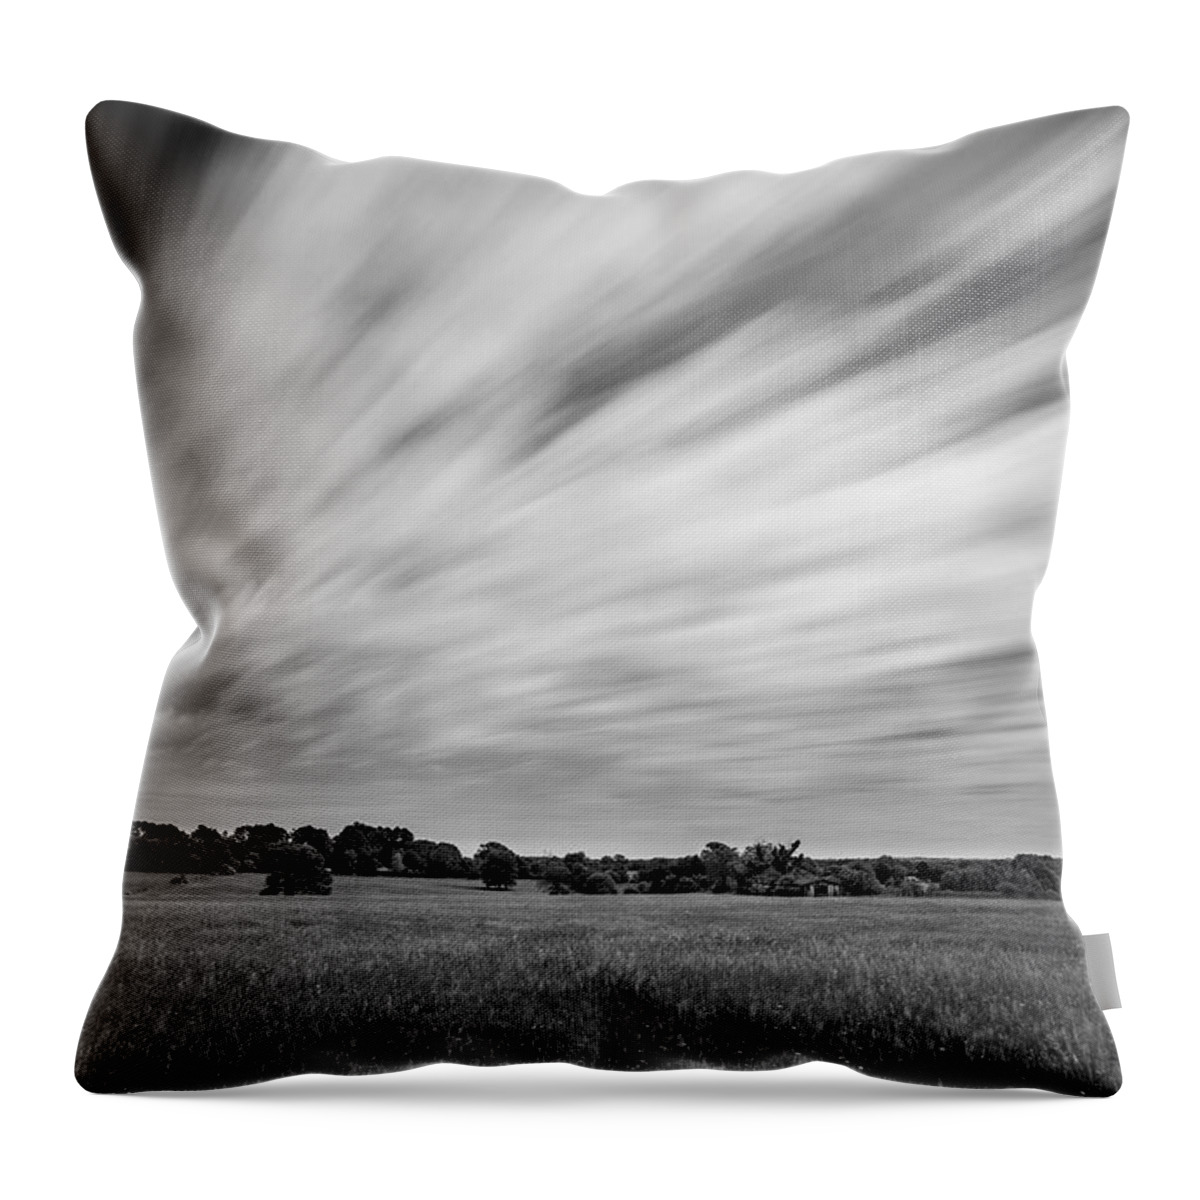 Clouds Throw Pillow featuring the photograph Clouds Moving Over East Texas Field by Todd Aaron